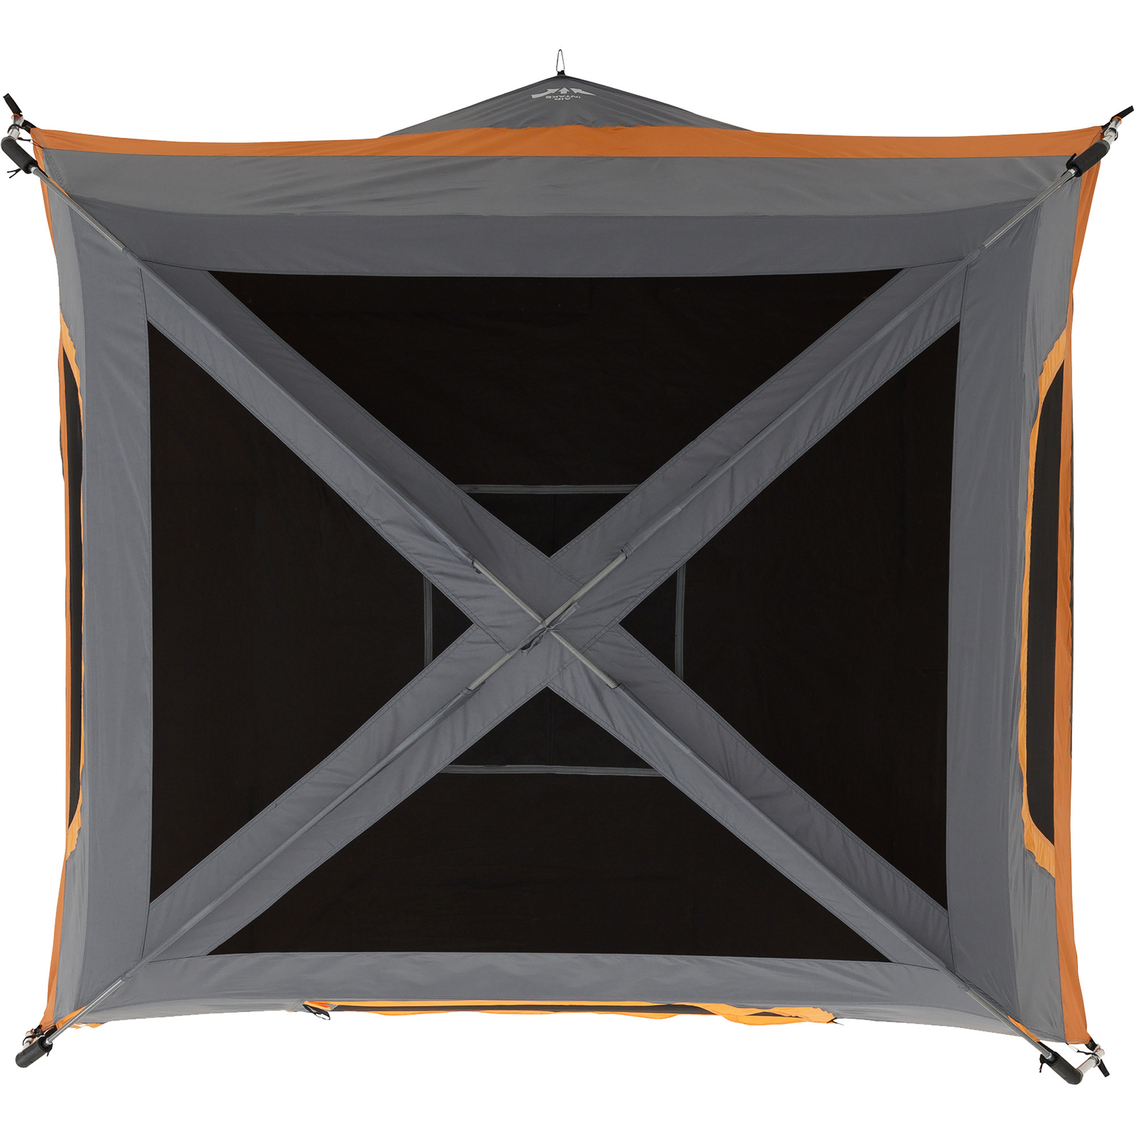 Core Equipment 4 Person Straight Wall Cabin Tent - Image 5 of 10